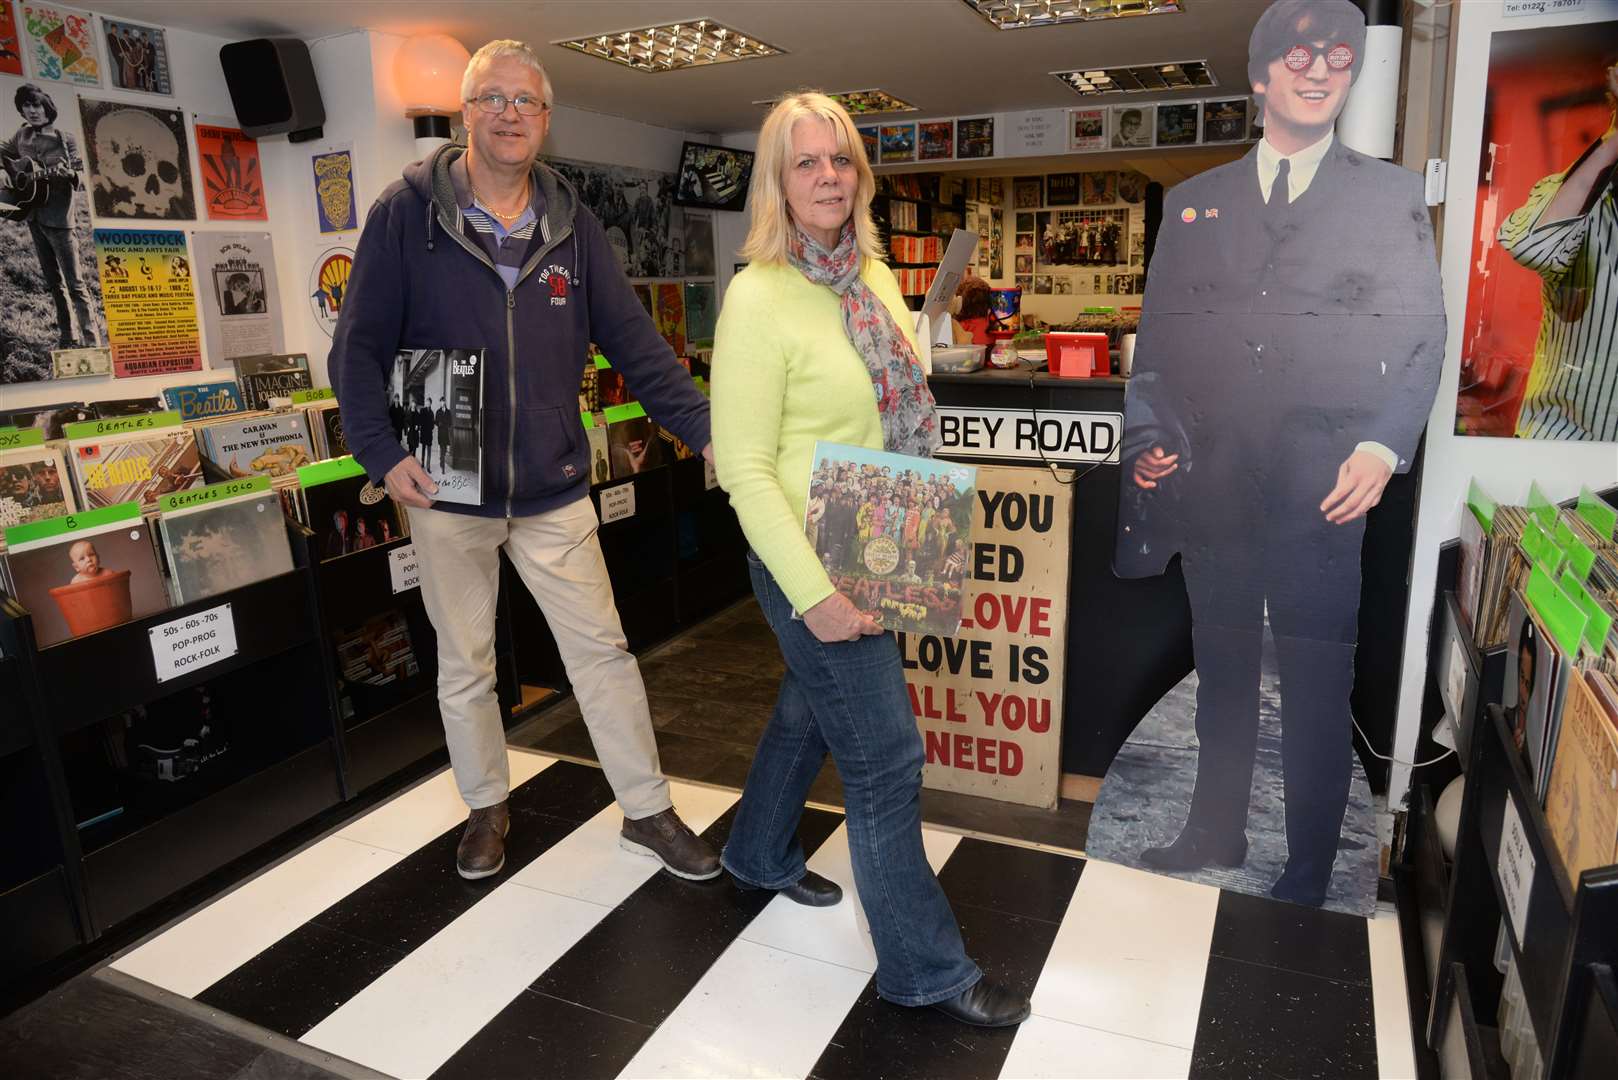 Oz and Chris Eastman at B'Side The C'Side in Herne Bay, who are retiring and selling the business. Picture: Chris Davey